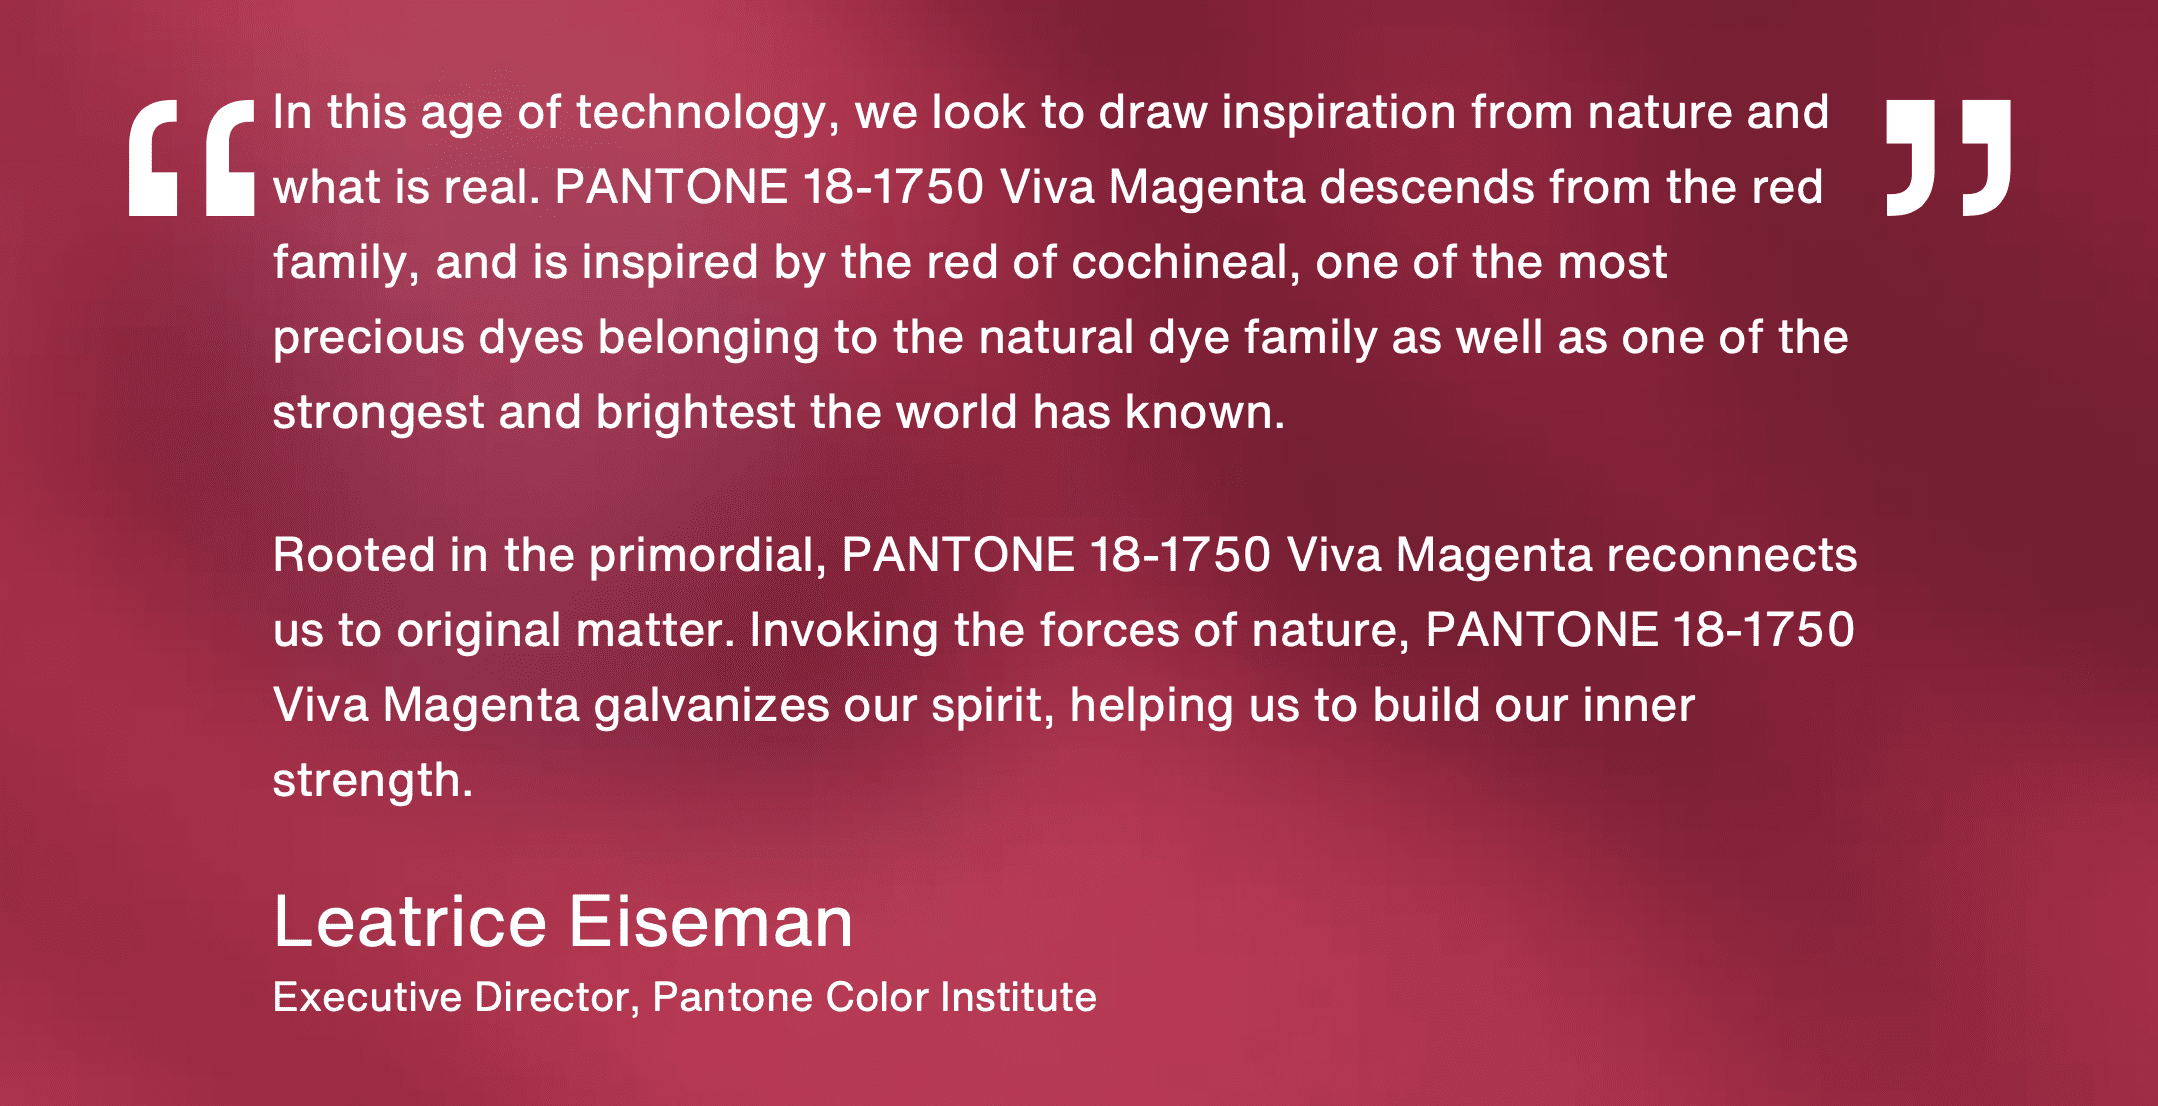 Announcing The COLOR OF THE YEAR 2023 Pantone Viva Magenta 18-1750